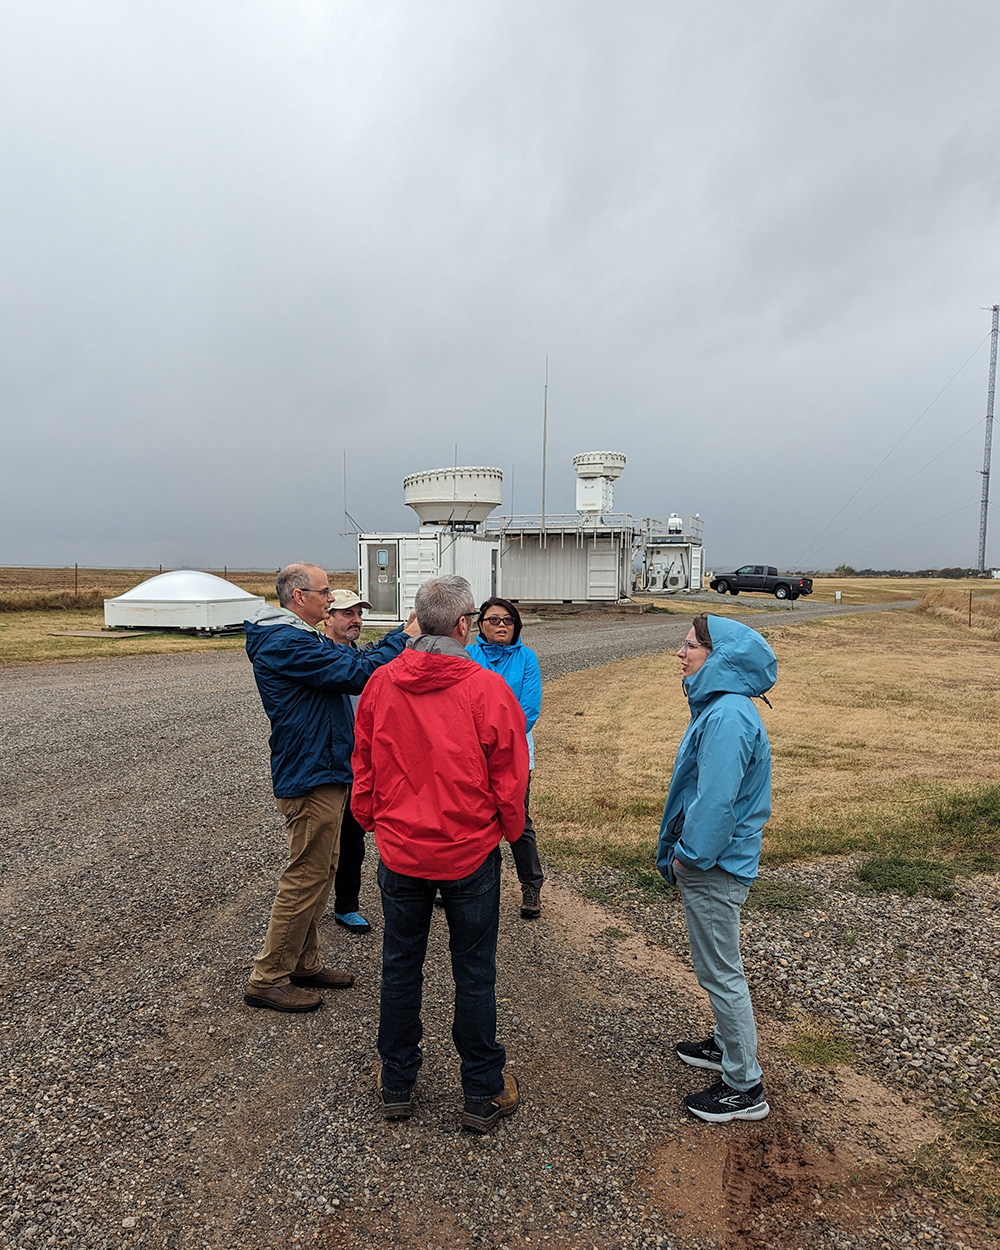 Jen Delamere talks with Mike Ritsche, Jim Mather, Connor Flynn, and Yunyan Zhang in front of ARM radars and lidars at the Southern Great Plains Central Facility.